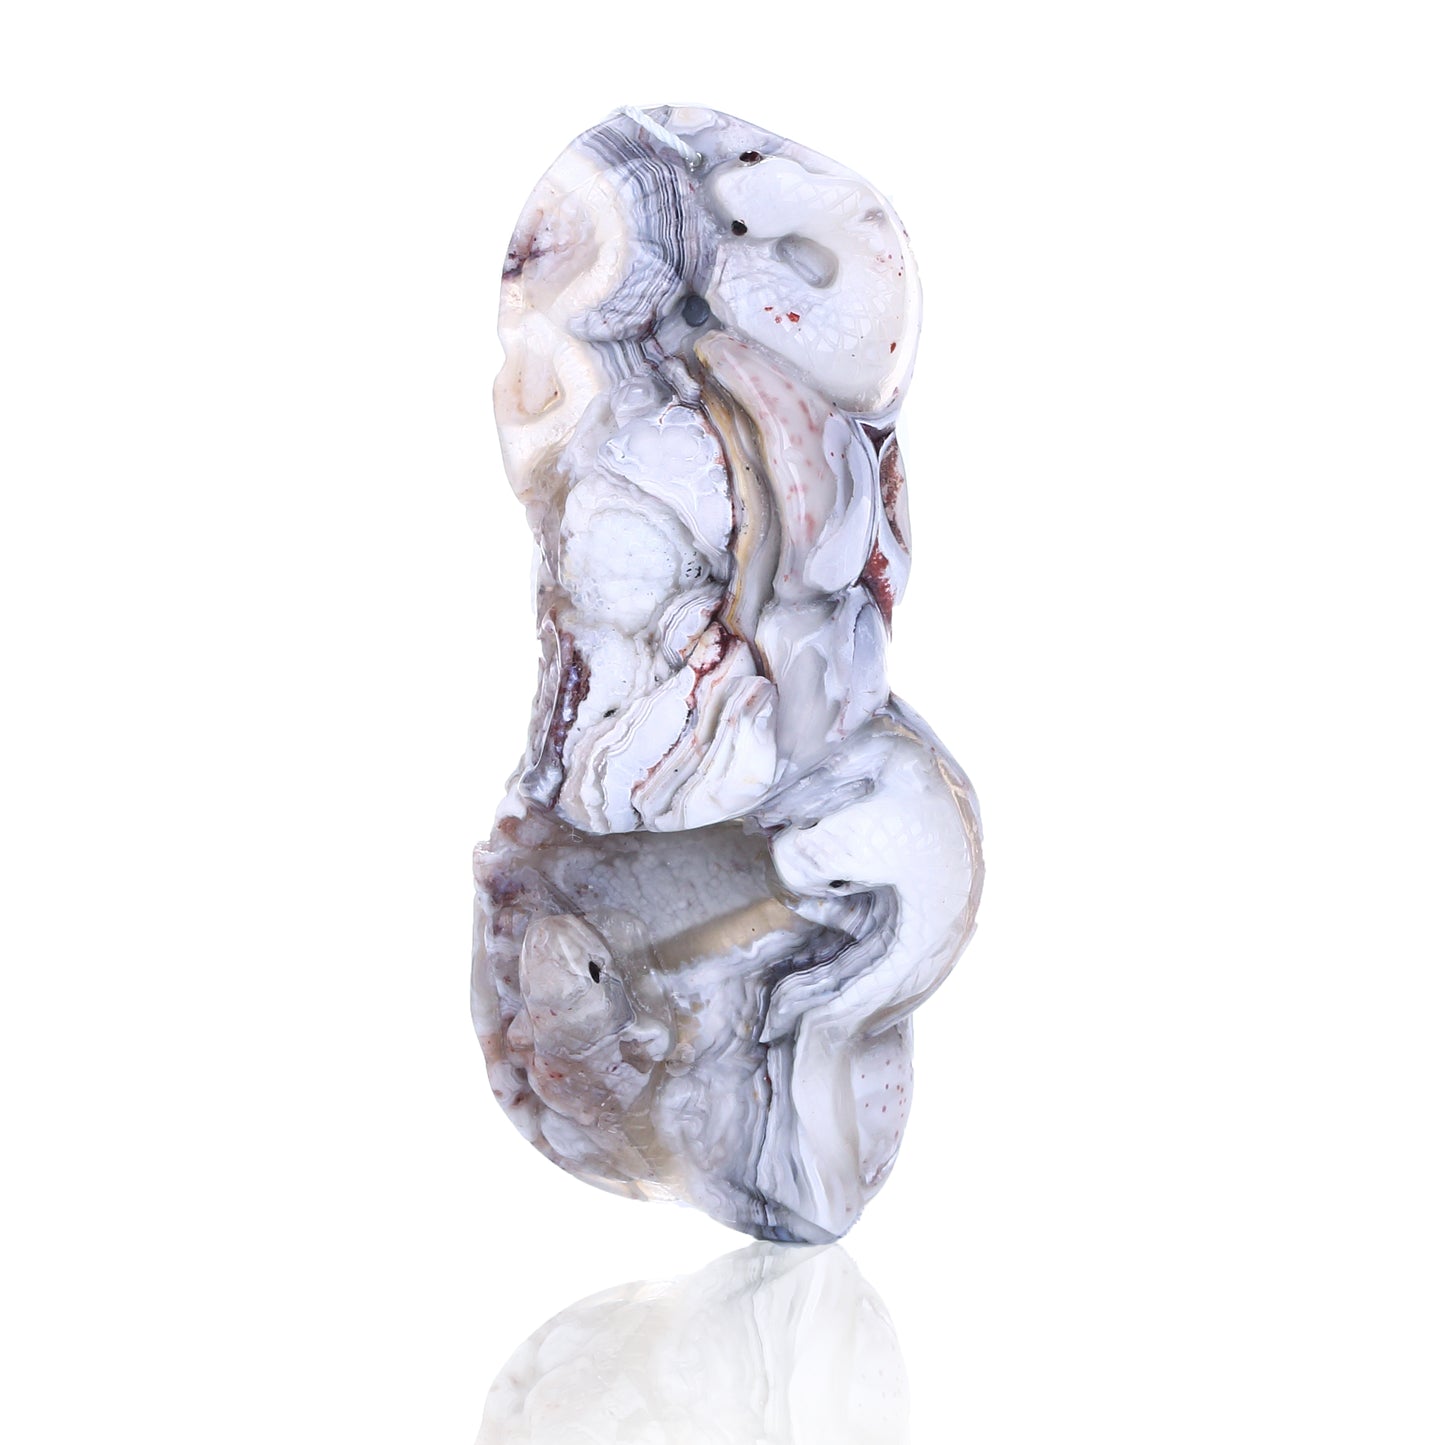 New Arrival Lace Agate Carved Snake Gemstone Pendant Bead, 82x40x18mm55.6g - MyGemGarden